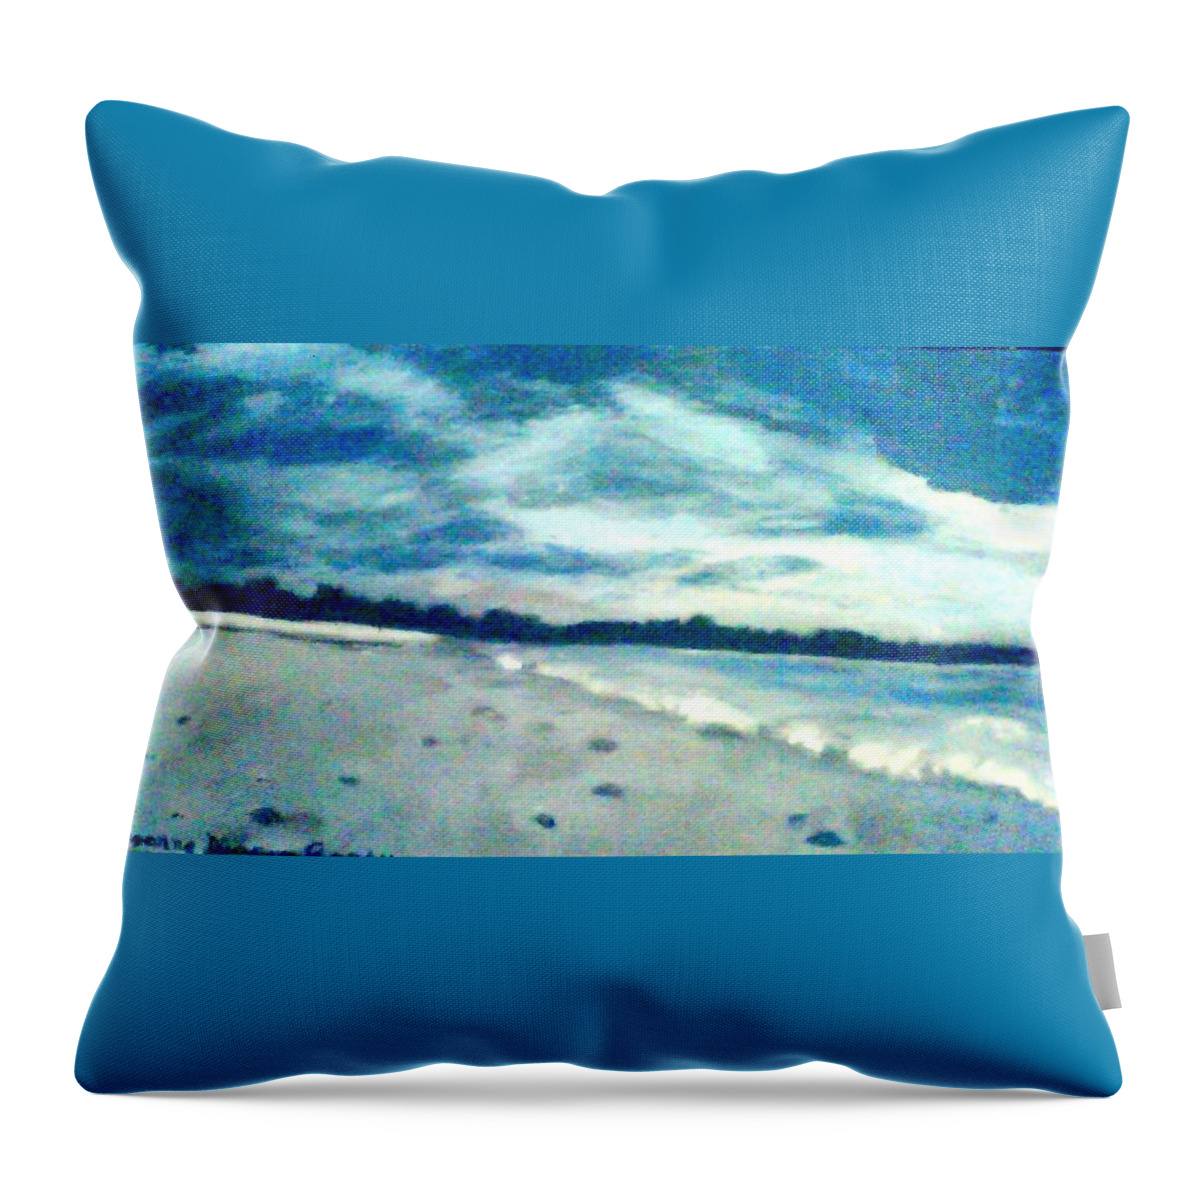 Florida Throw Pillow featuring the painting Lido Beach Evening by Suzanne Berthier